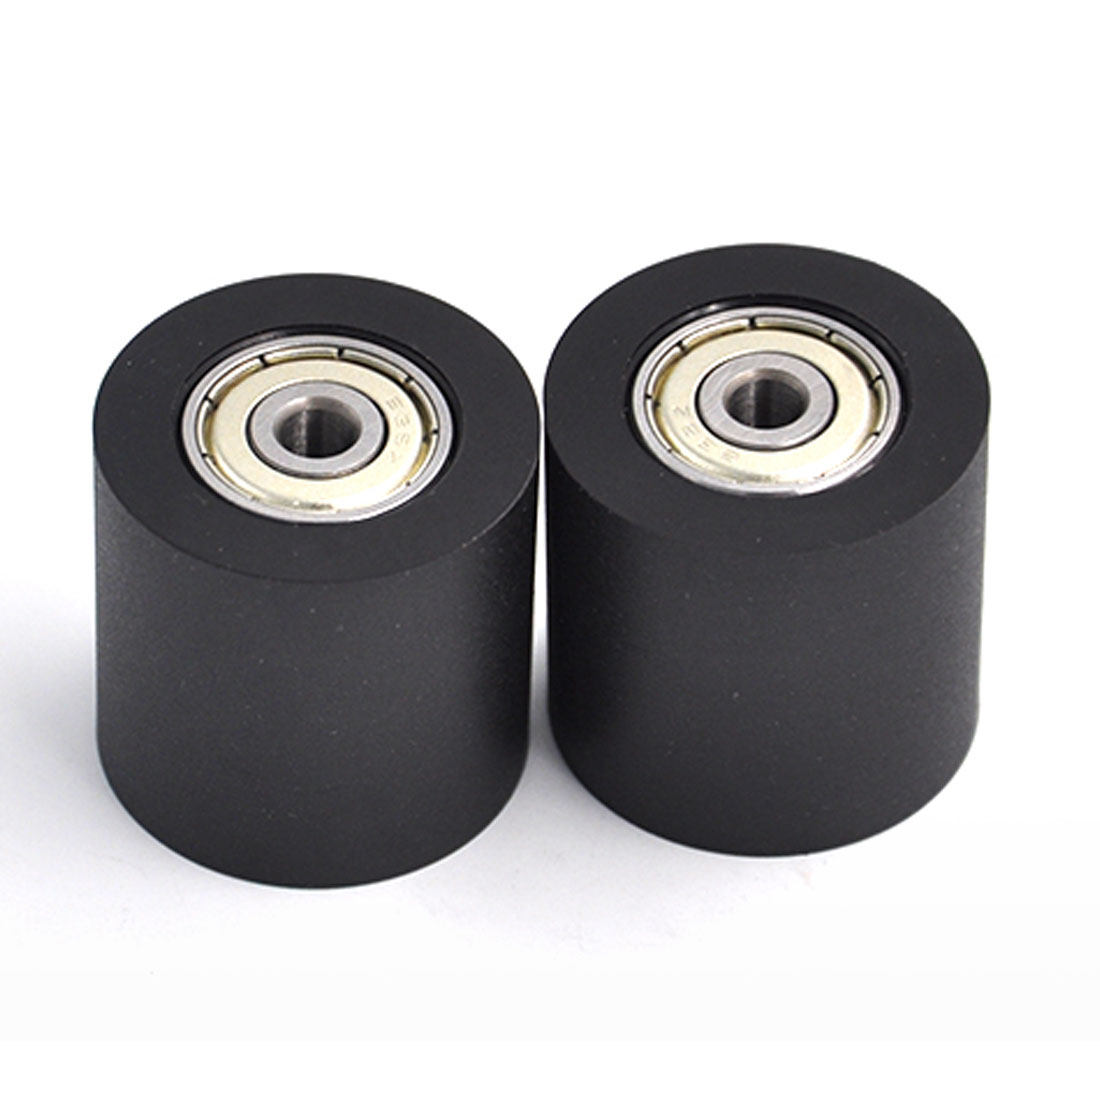 PUT63530-30 PU Rubber Coated Roller Wheel With 635ZZ Double Bearing 5x30x30mm